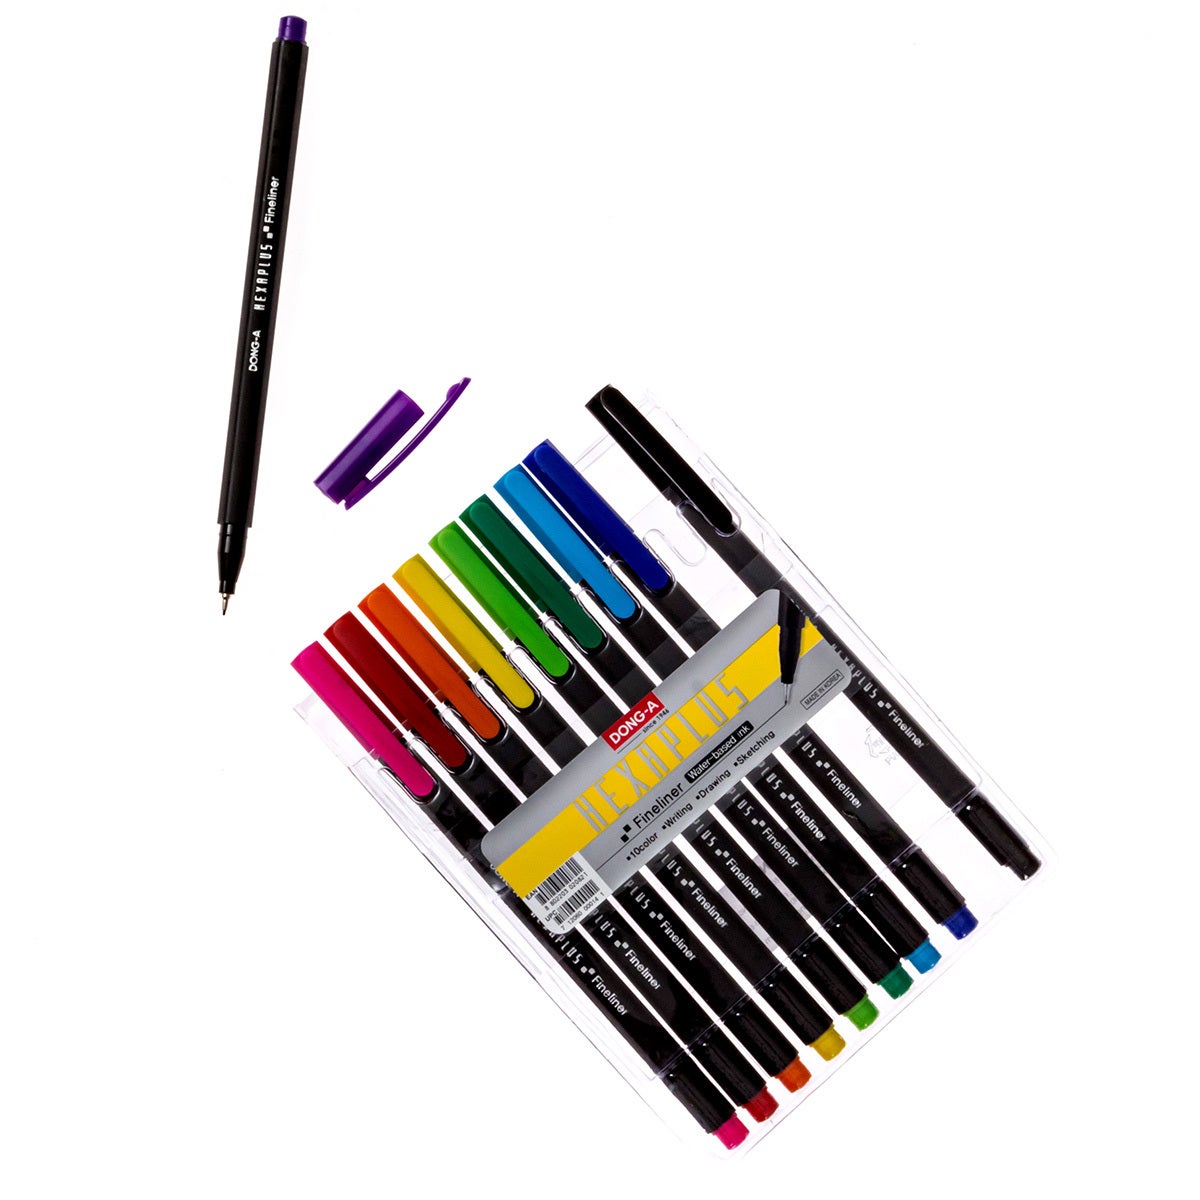 DONG-A Hexaplus Fineliner - 10 Color Set product image 3